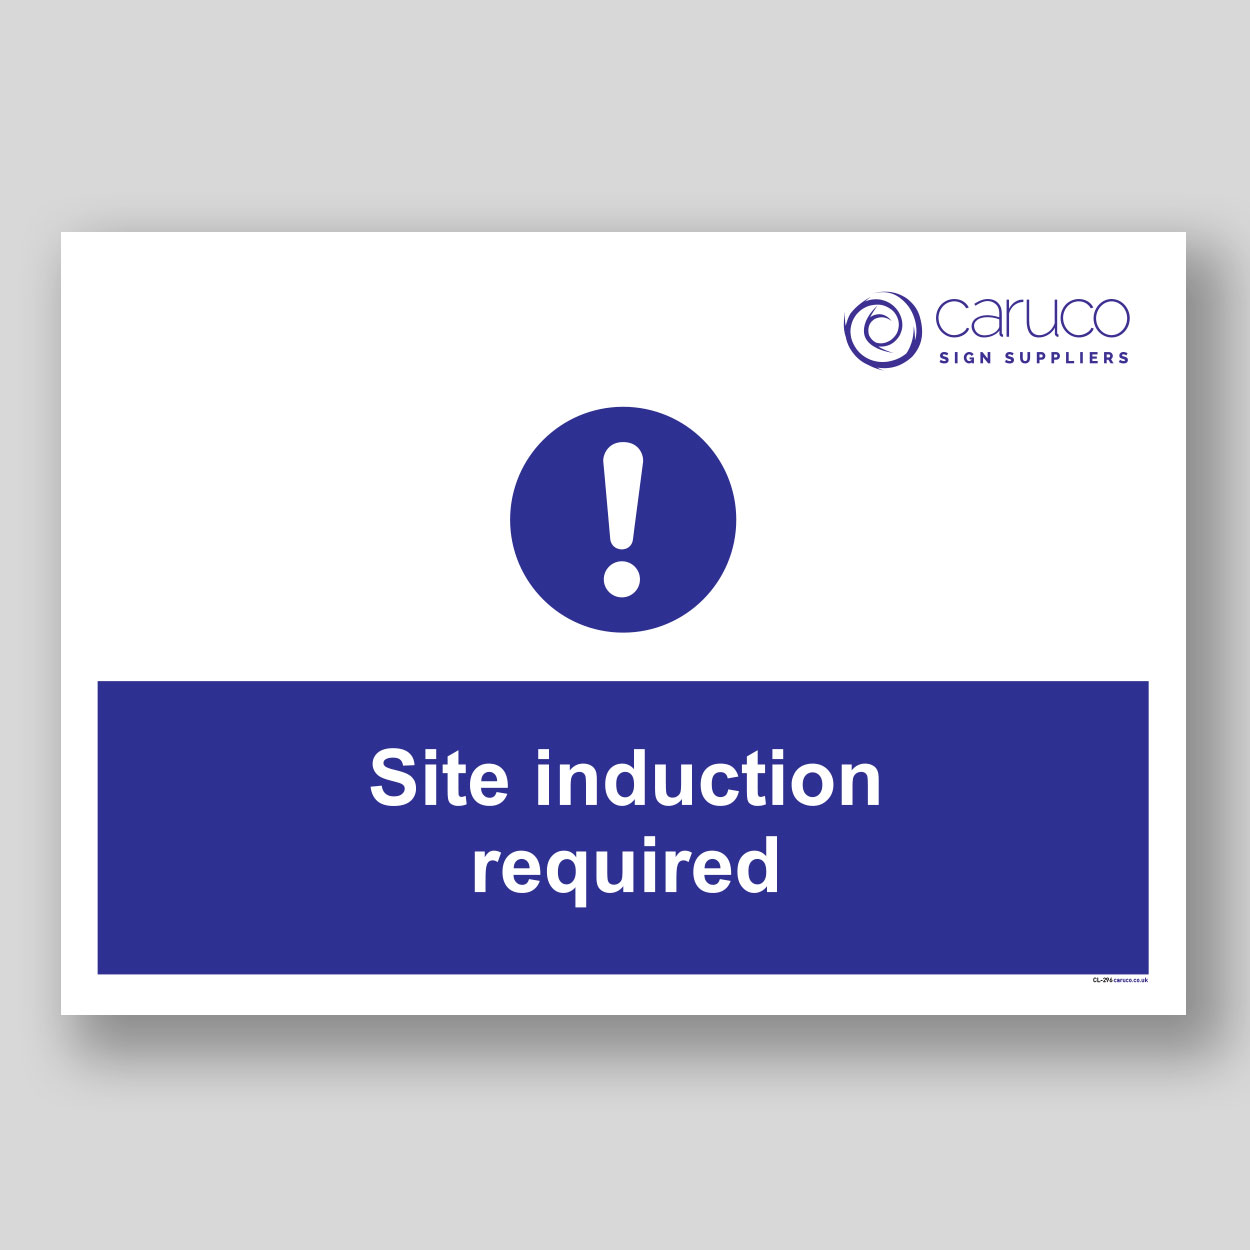 CL-296 Site induction required